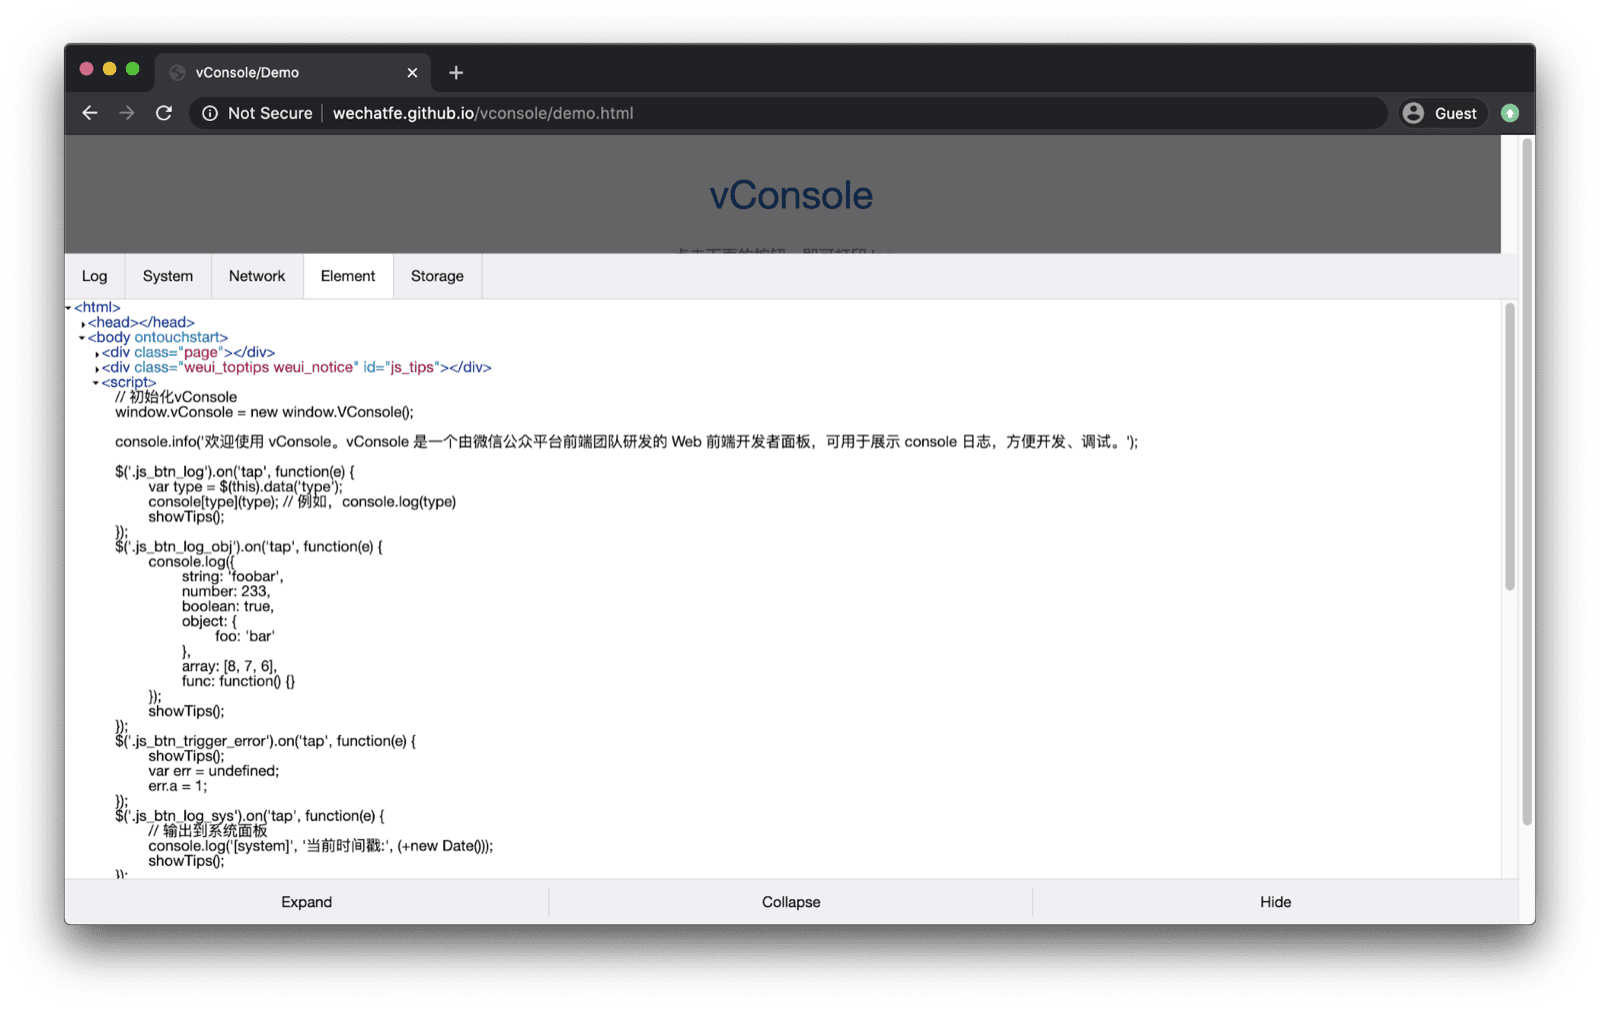 vConsole demo app. The vConsole opens at the bottom and has tabs for logs, system, network, elements, and storage.